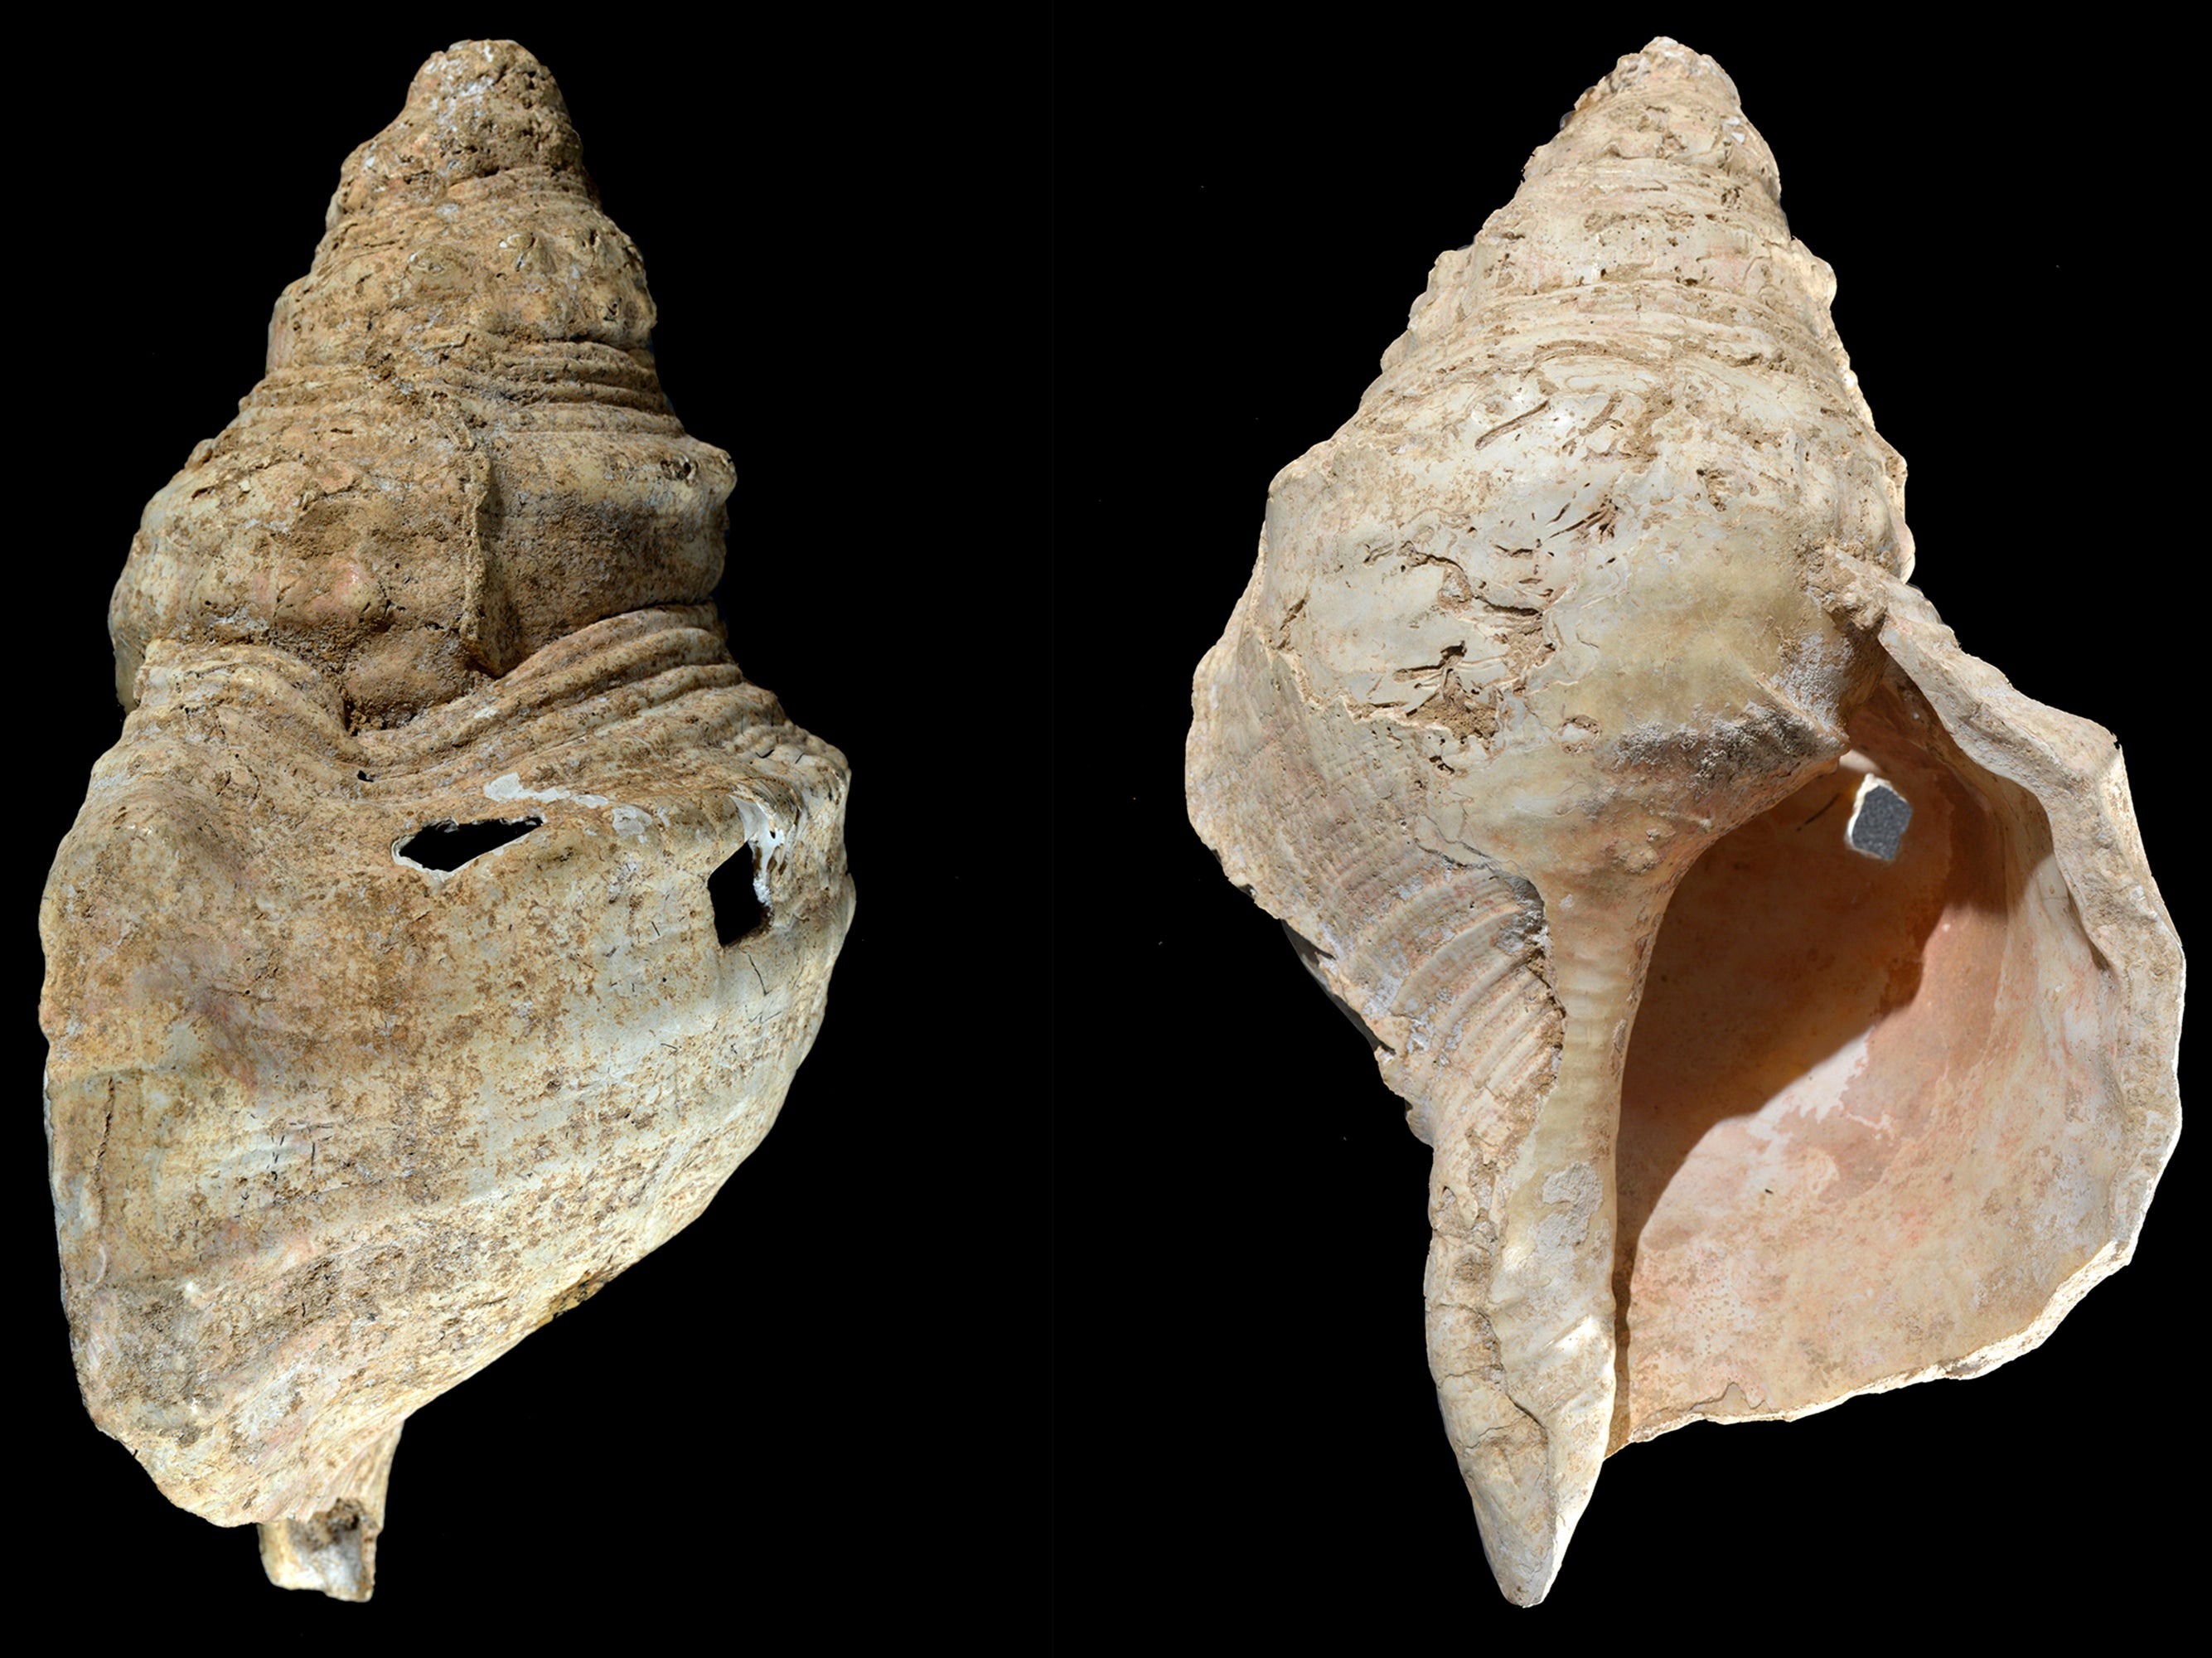 This combination of photos provided by researcher Carole Fritz in February 2021 shows two sides of a 12-inch (31 cm) conch shell discovered in a French cave with prehistoric wall paintings in 1931